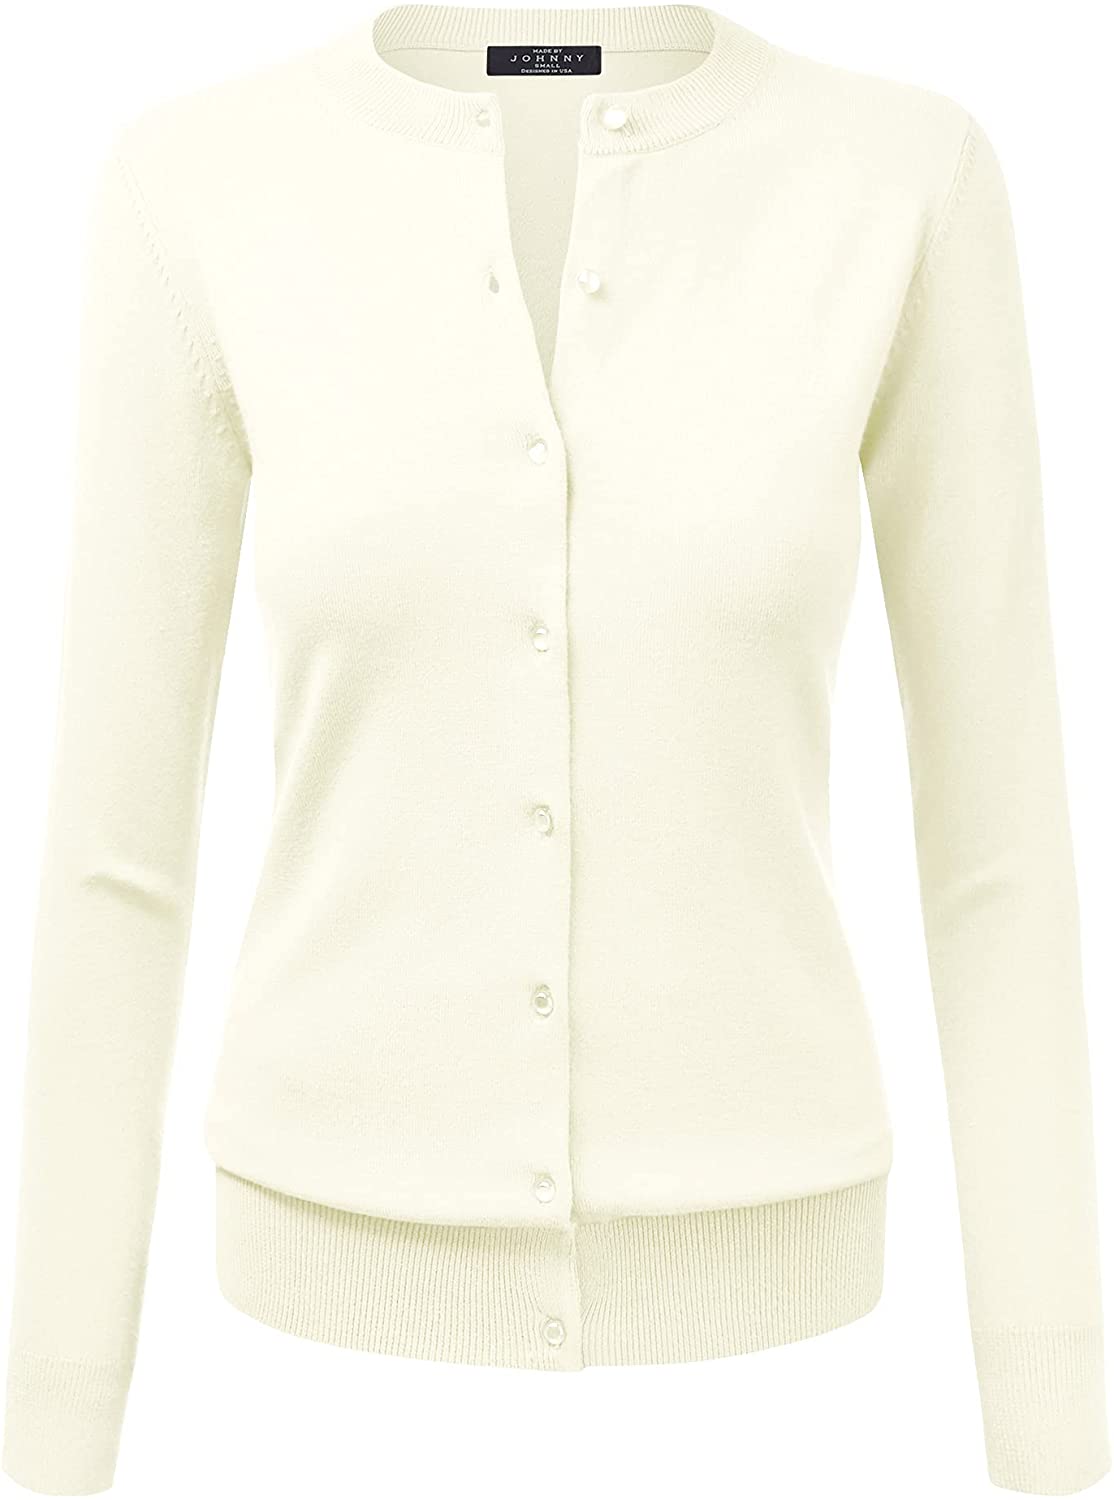 MBJ Womens Long Sleeve Button Down Classic Knit Cardigan Sweater 